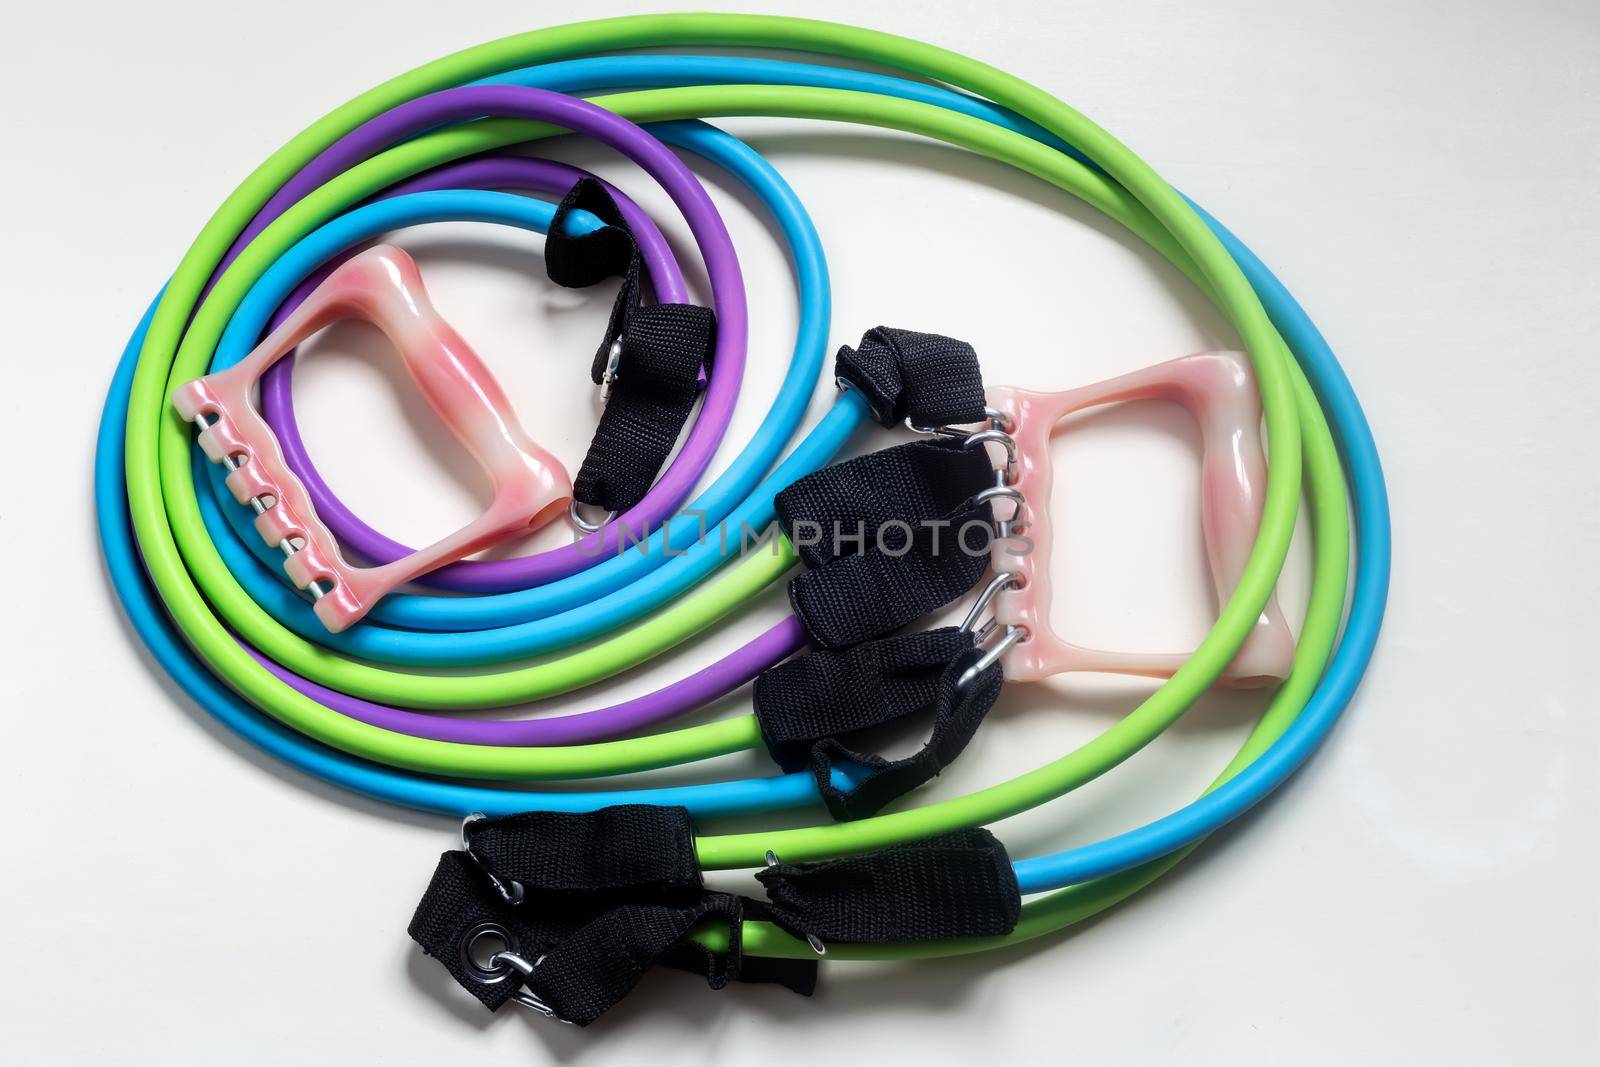 Sports expander with a set of elastic bands and handles to strengthen the muscles of various groups, multifunctional. It can be used for training at home, which is useful during restrictions due to the epidemic of coronavirus infection.